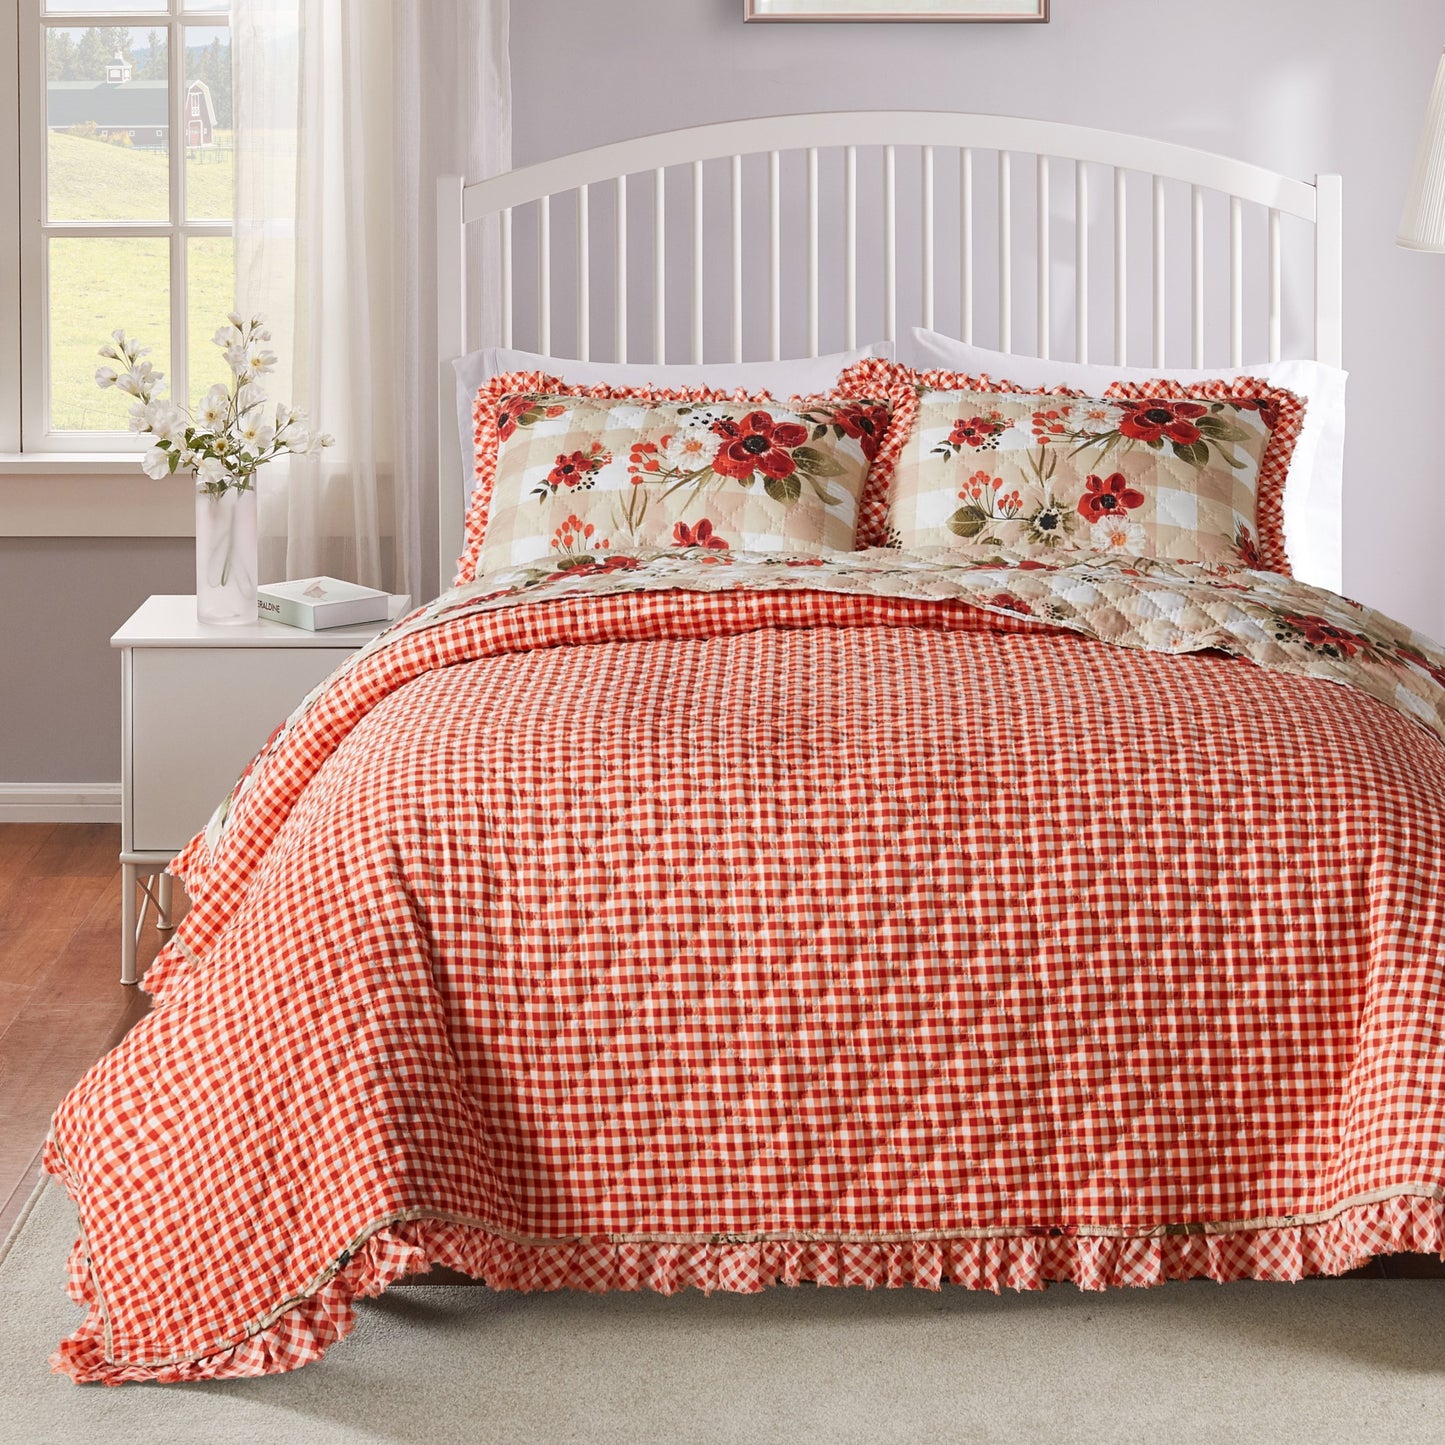 Wheatly Quilt Set